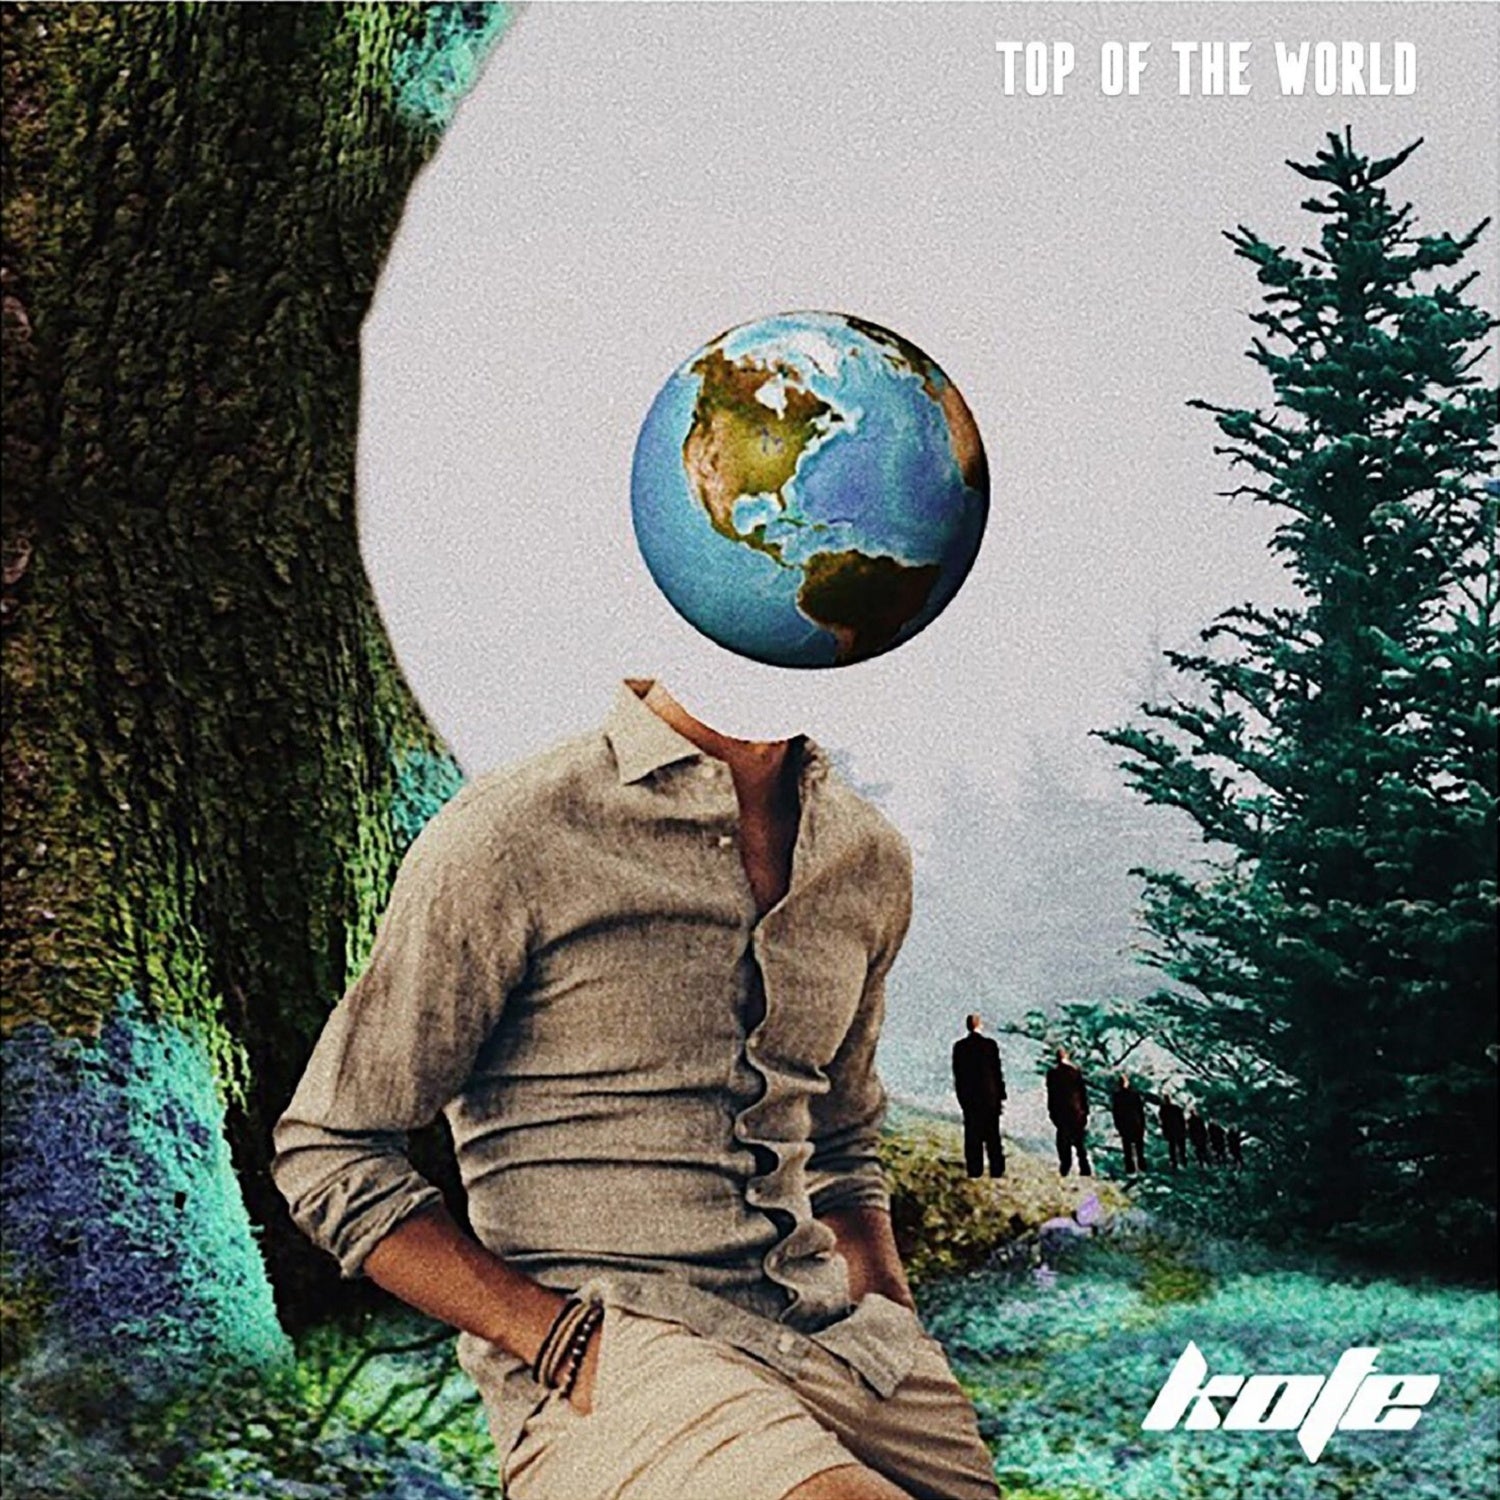 Kings Of The Earth – ‘Top of the World’